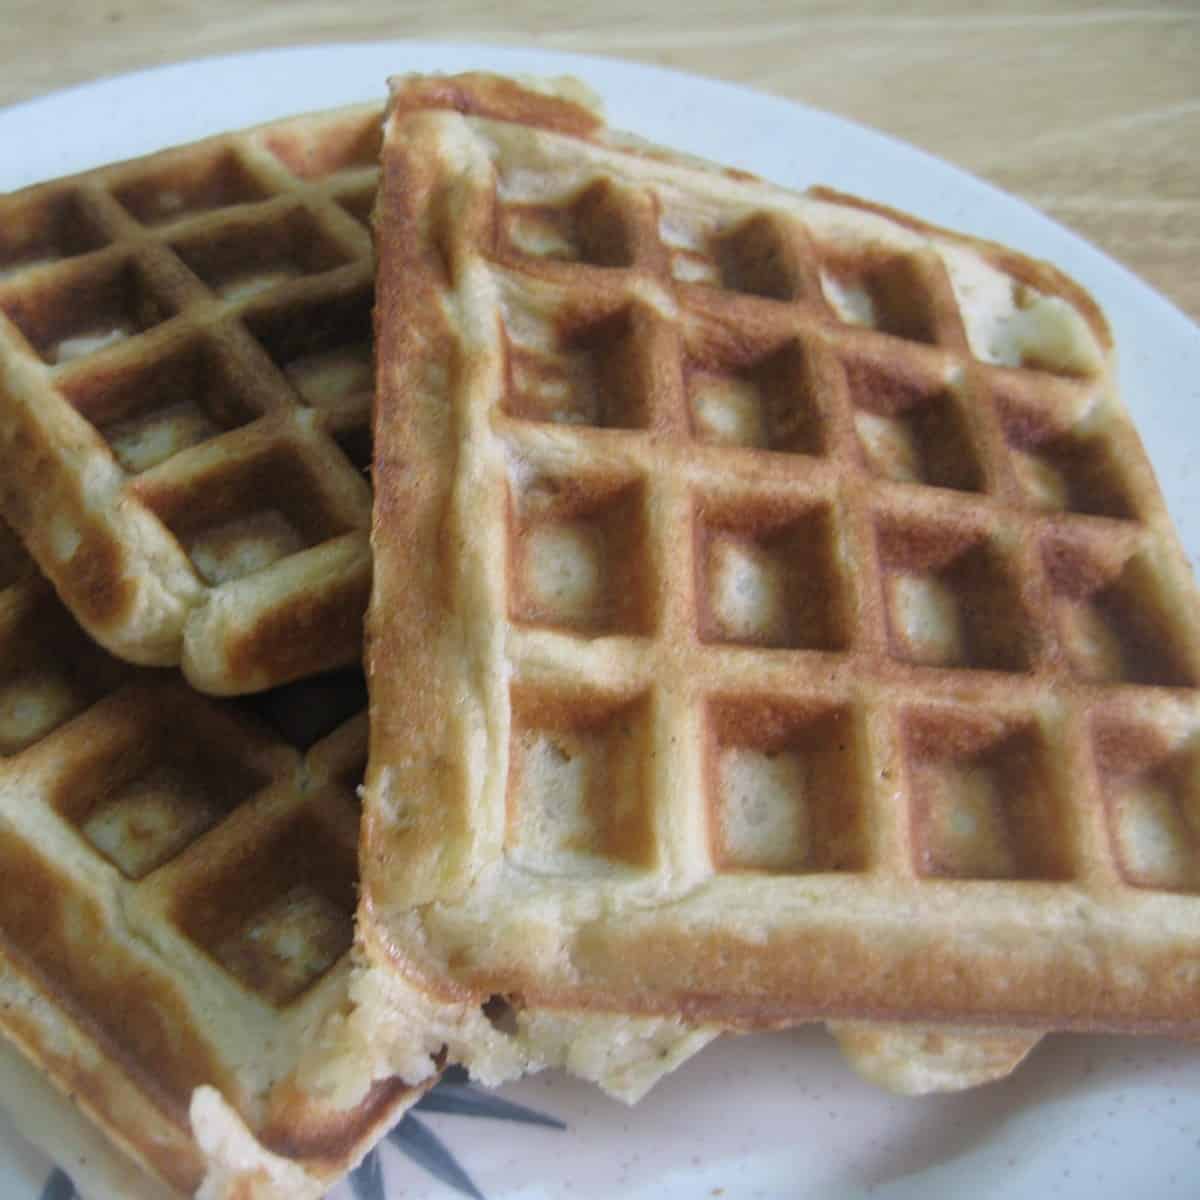  Who needs eggs and wheat flour when you can whip up these mouthwatering waffles without them?